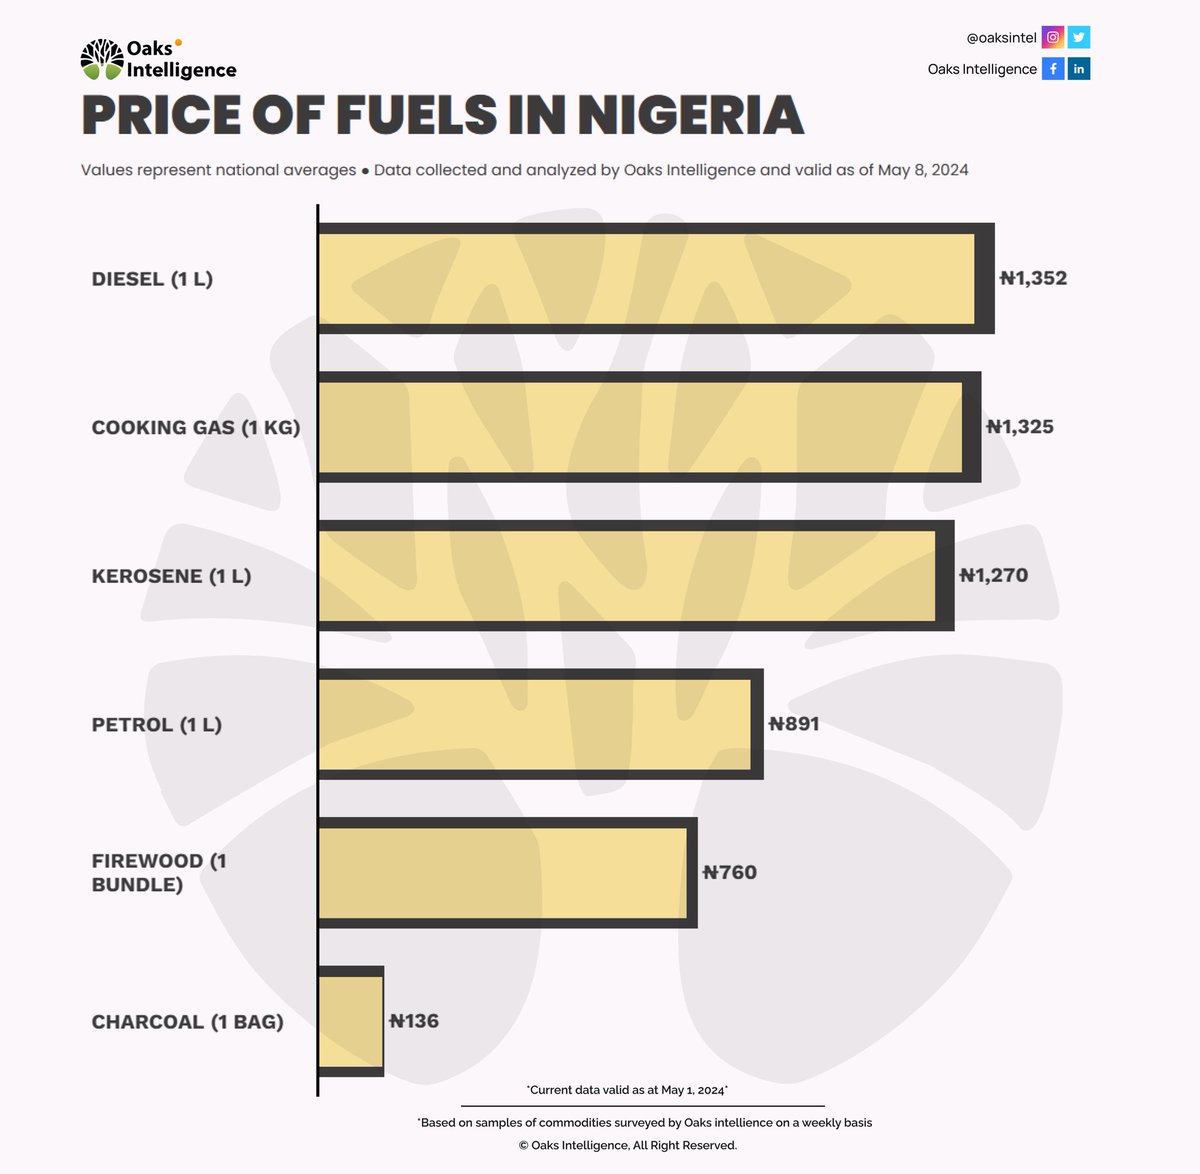 As of the 8th of May, diesel was priced at around 1,352 naira per litre, 40 naira cheaper than last week while petrol was priced at 891 naira per litre, and kerosene at 1,270 naira per litre on average. Additionally, firewood was selling for 760 naira per bundle, charcoal for